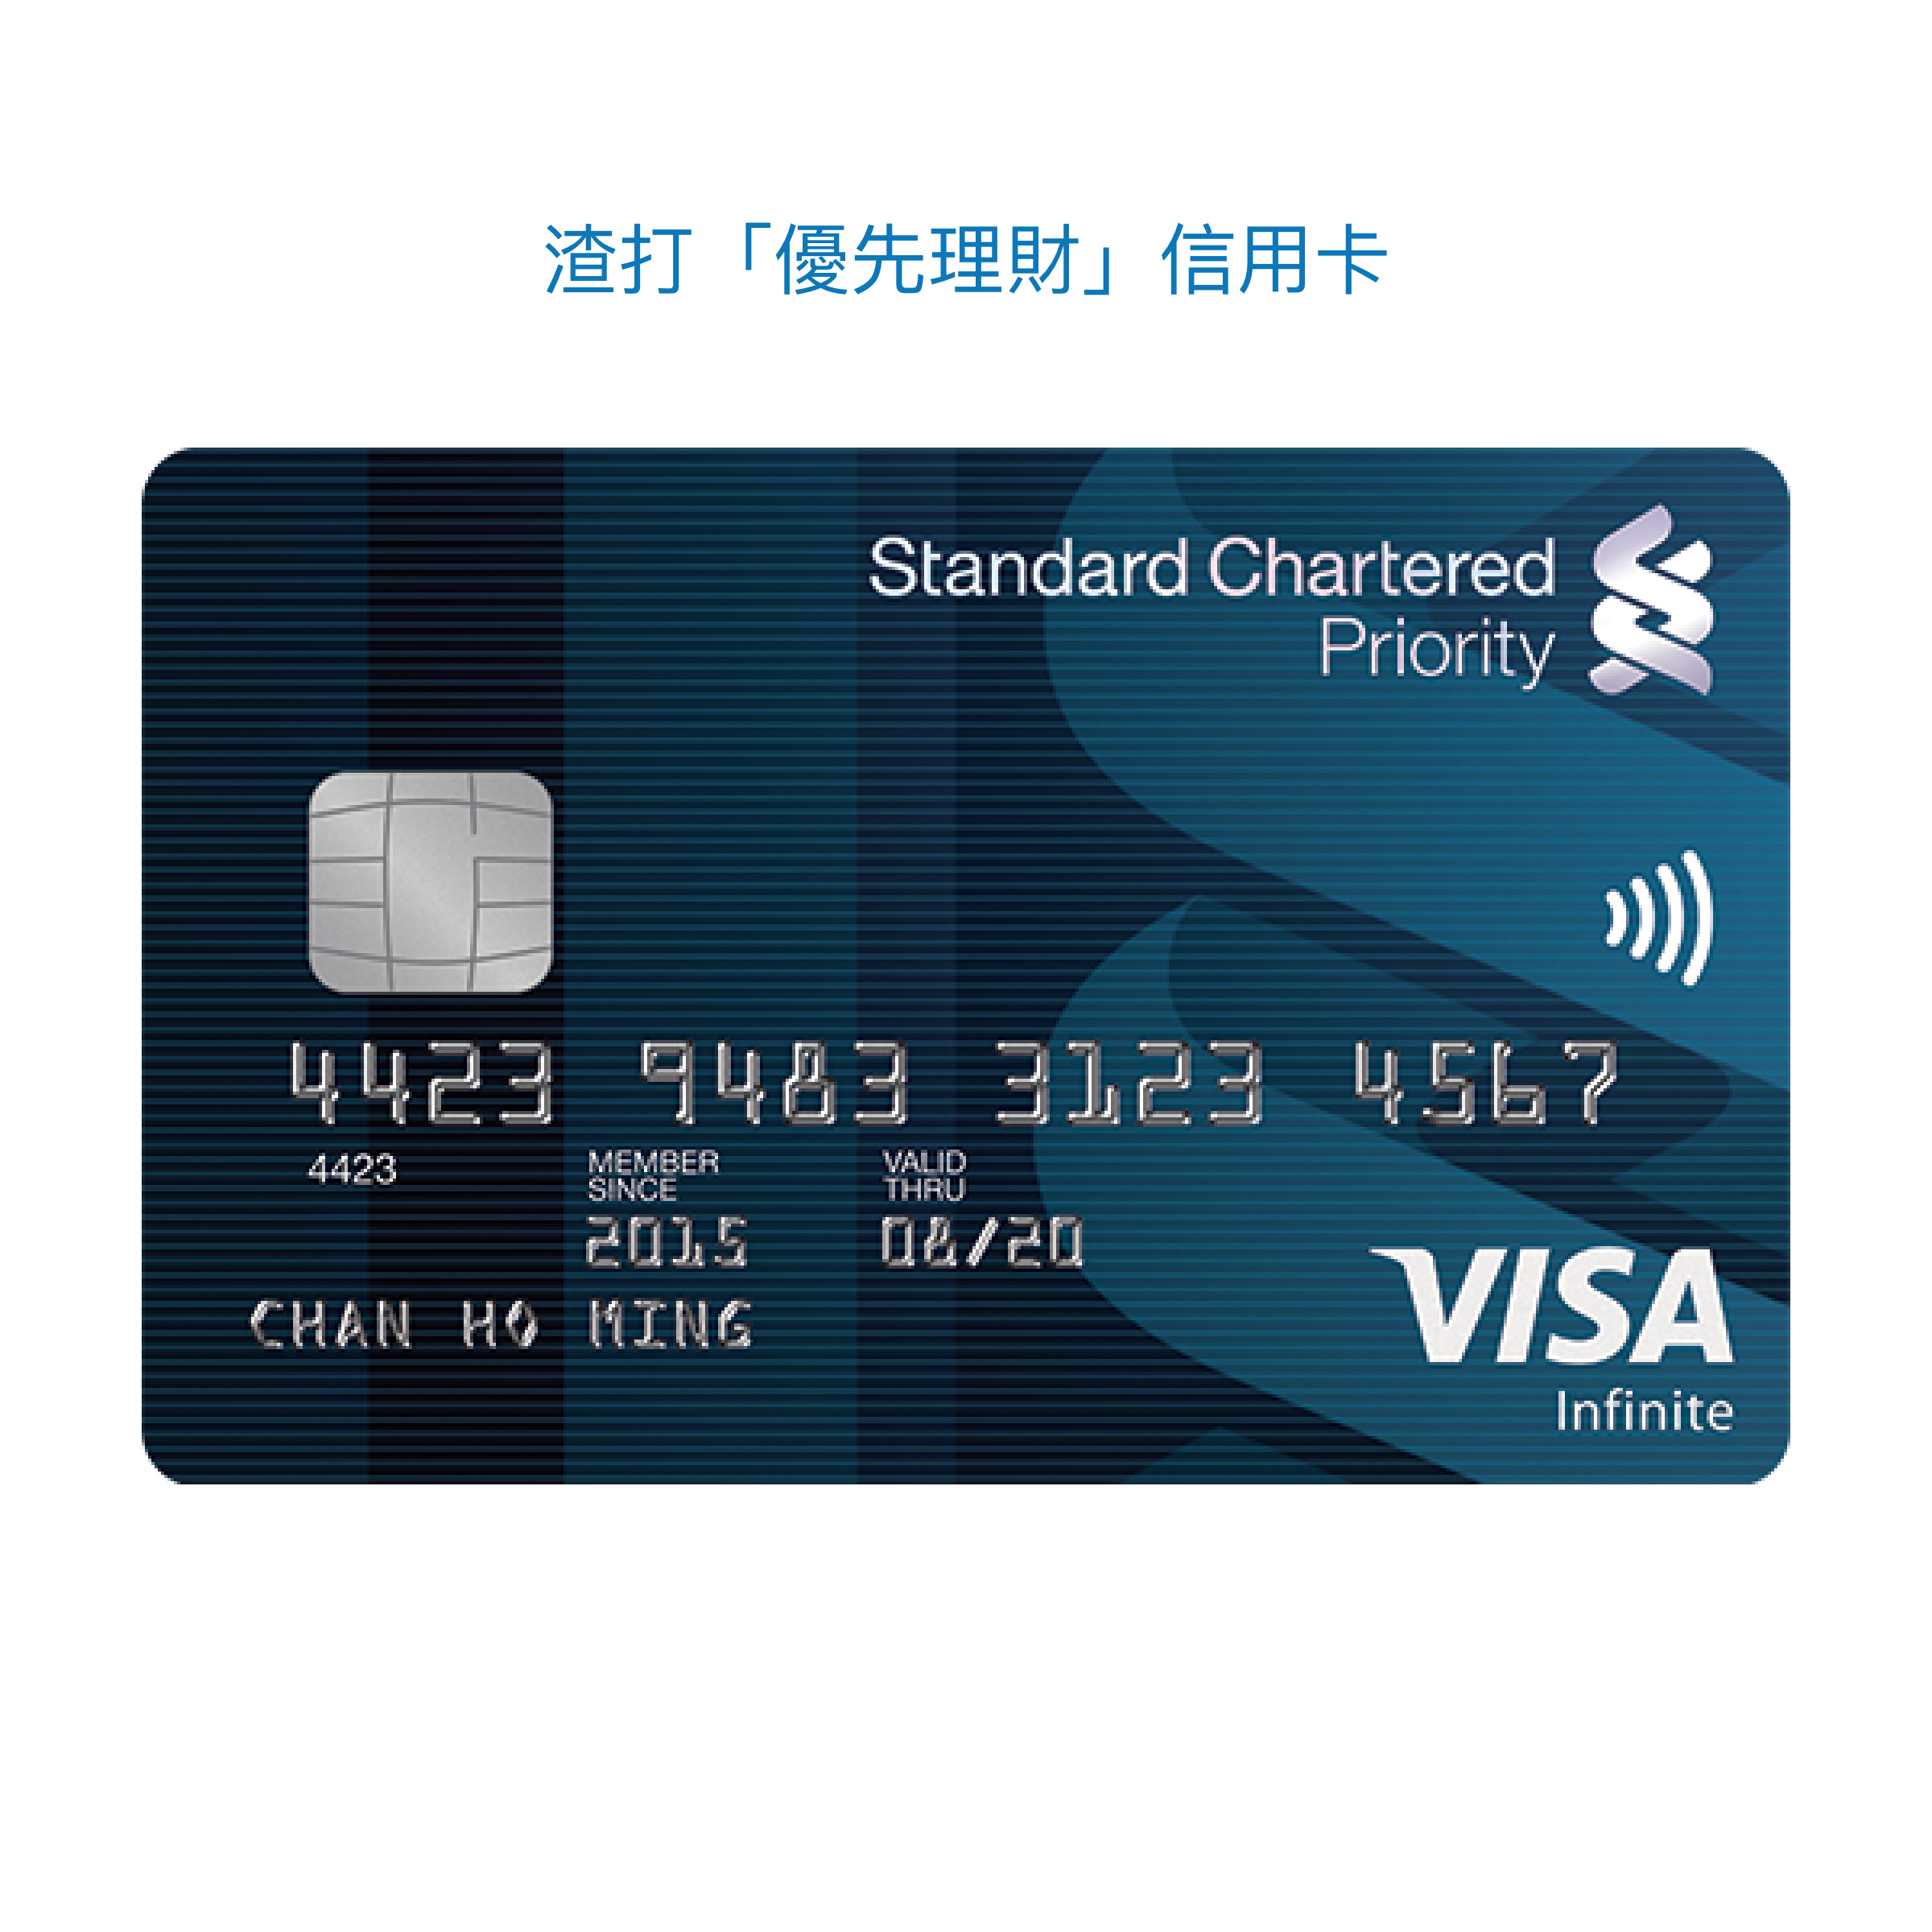 Cc category page priority banking credit card